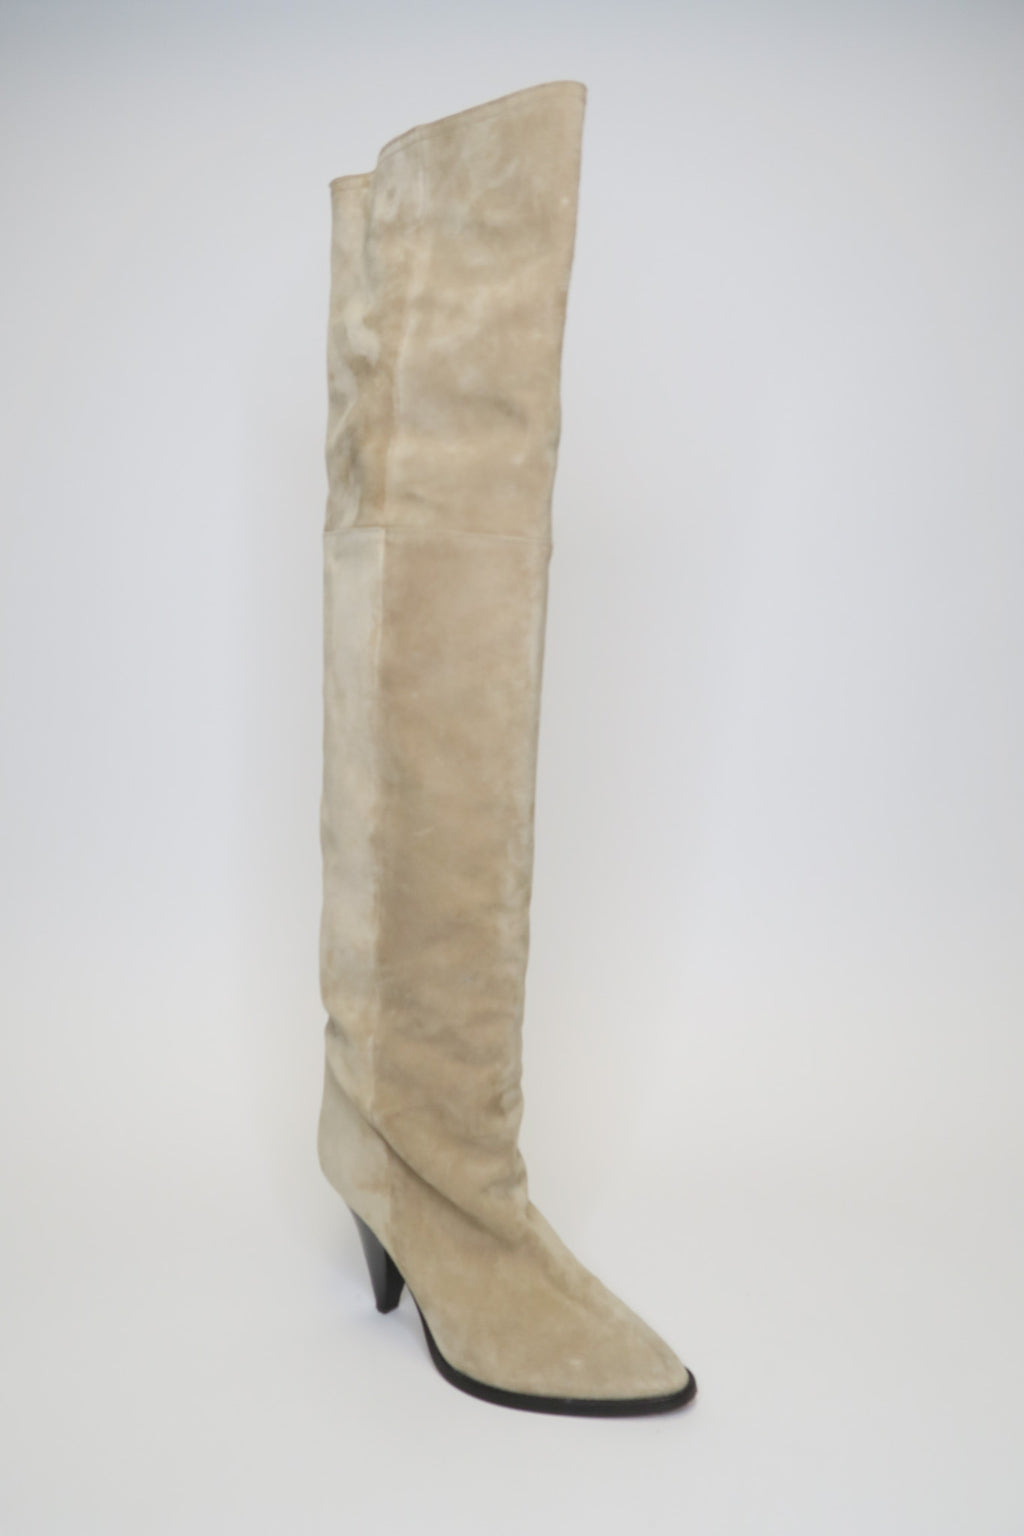 Isabel Marant Suede Knee-High Boots sz 37